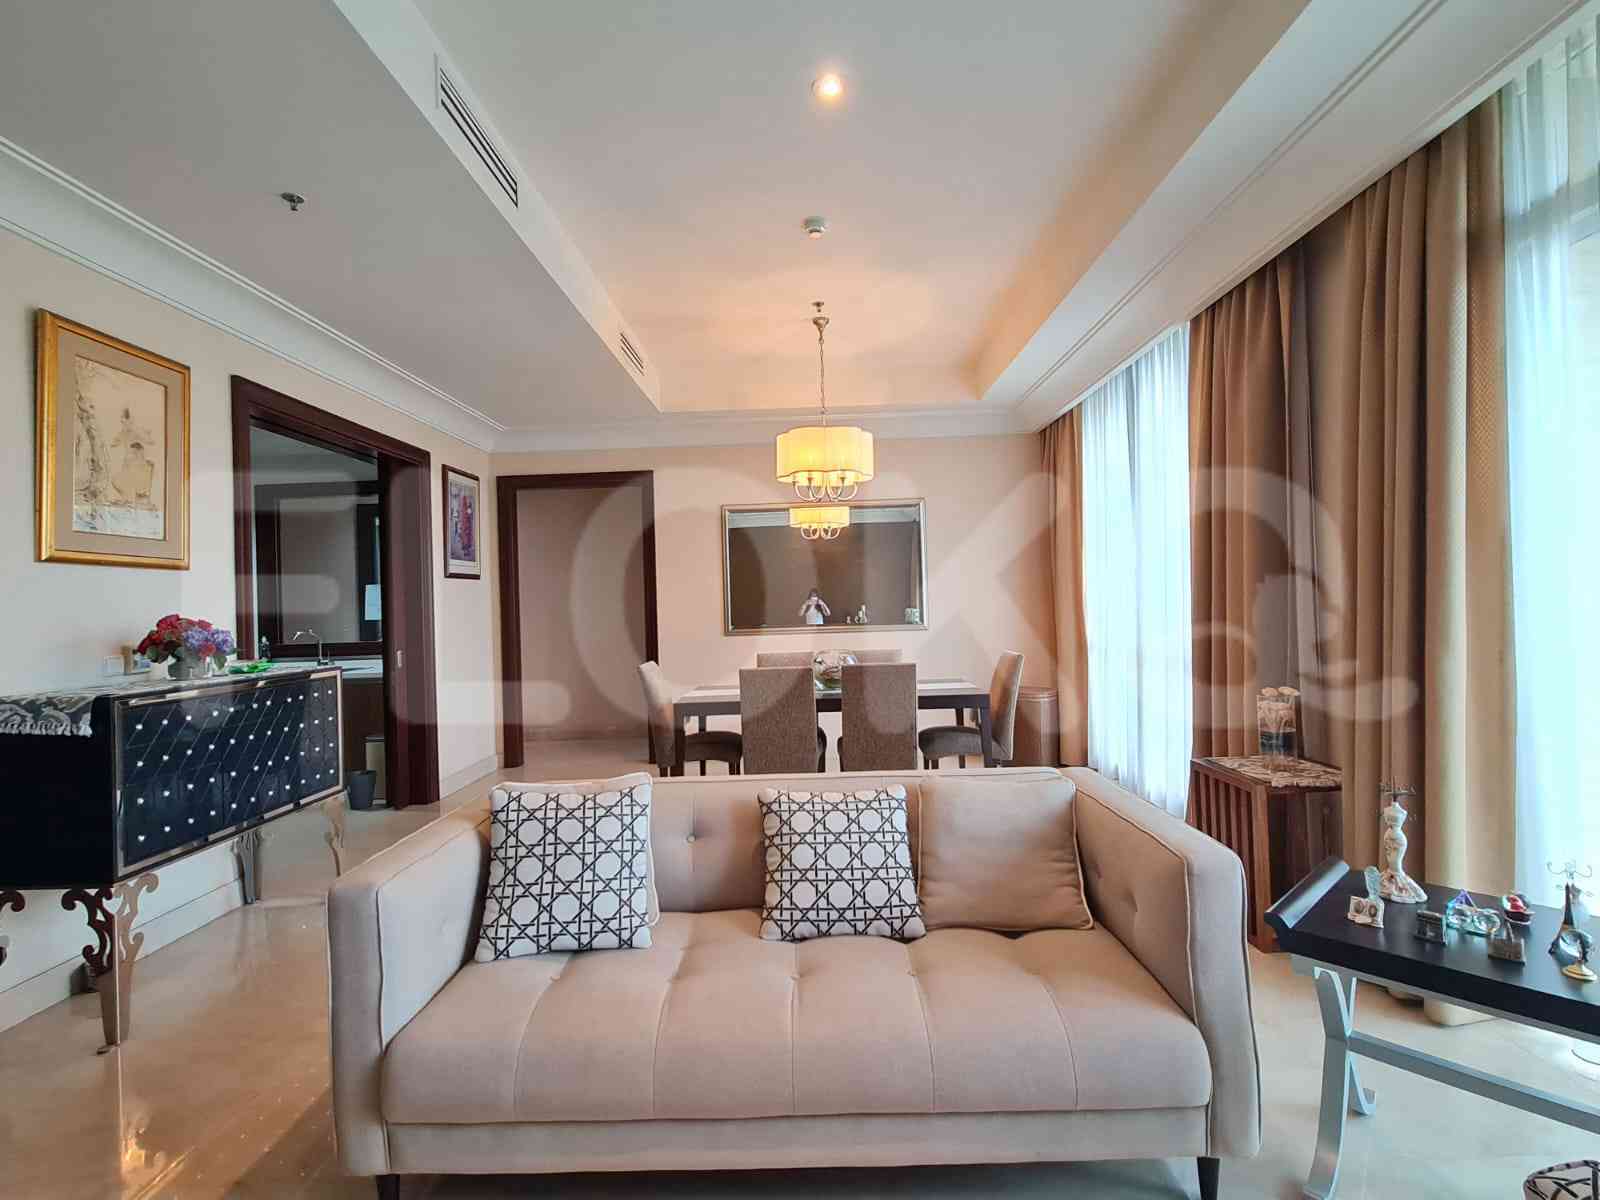 3 Bedroom on 2nd Floor for Rent in Pakubuwono View - fgace9 3